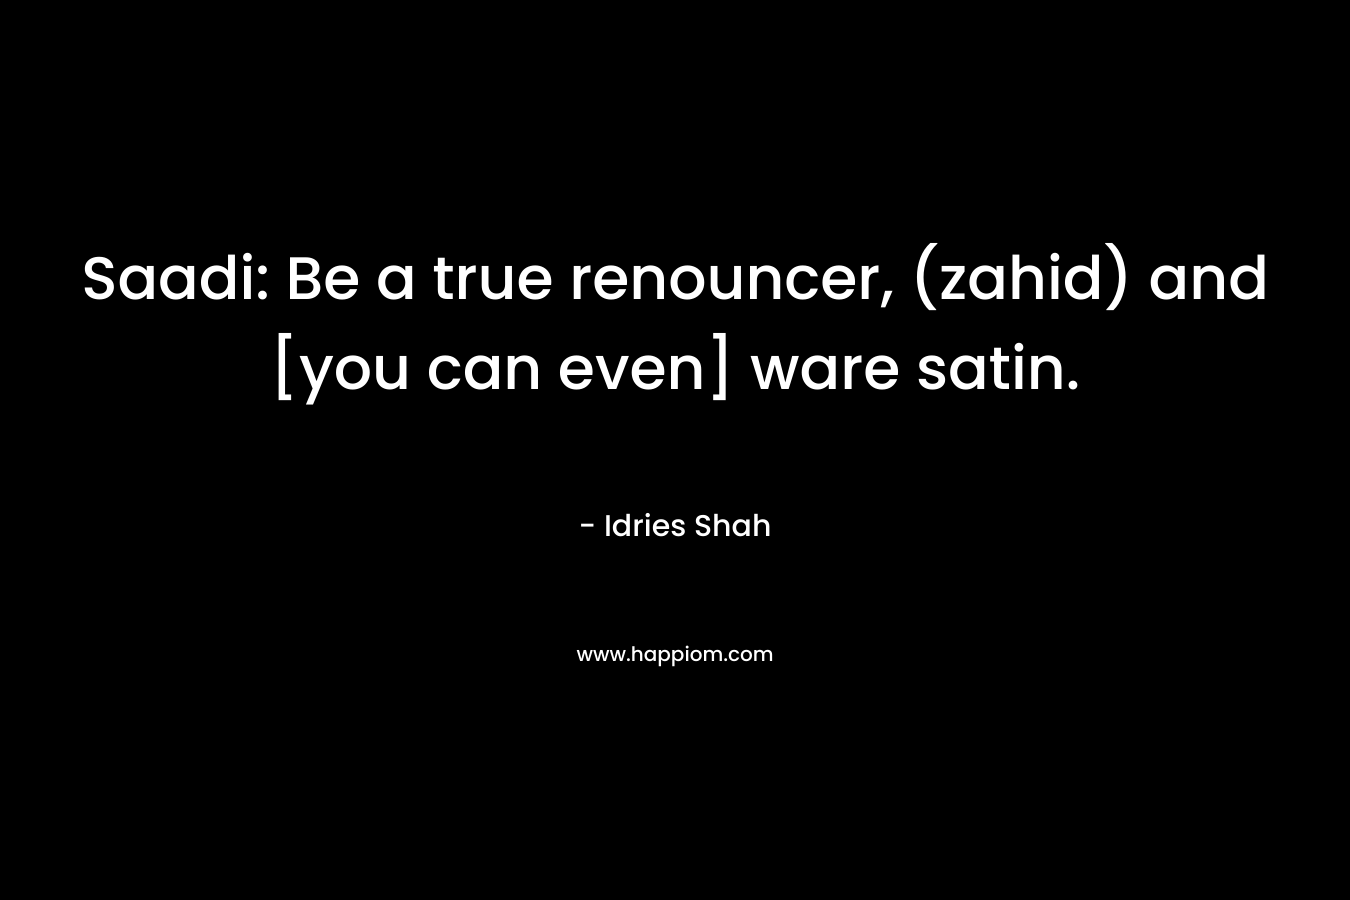 Saadi: Be a true renouncer, (zahid) and [you can even] ware satin. – Idries Shah